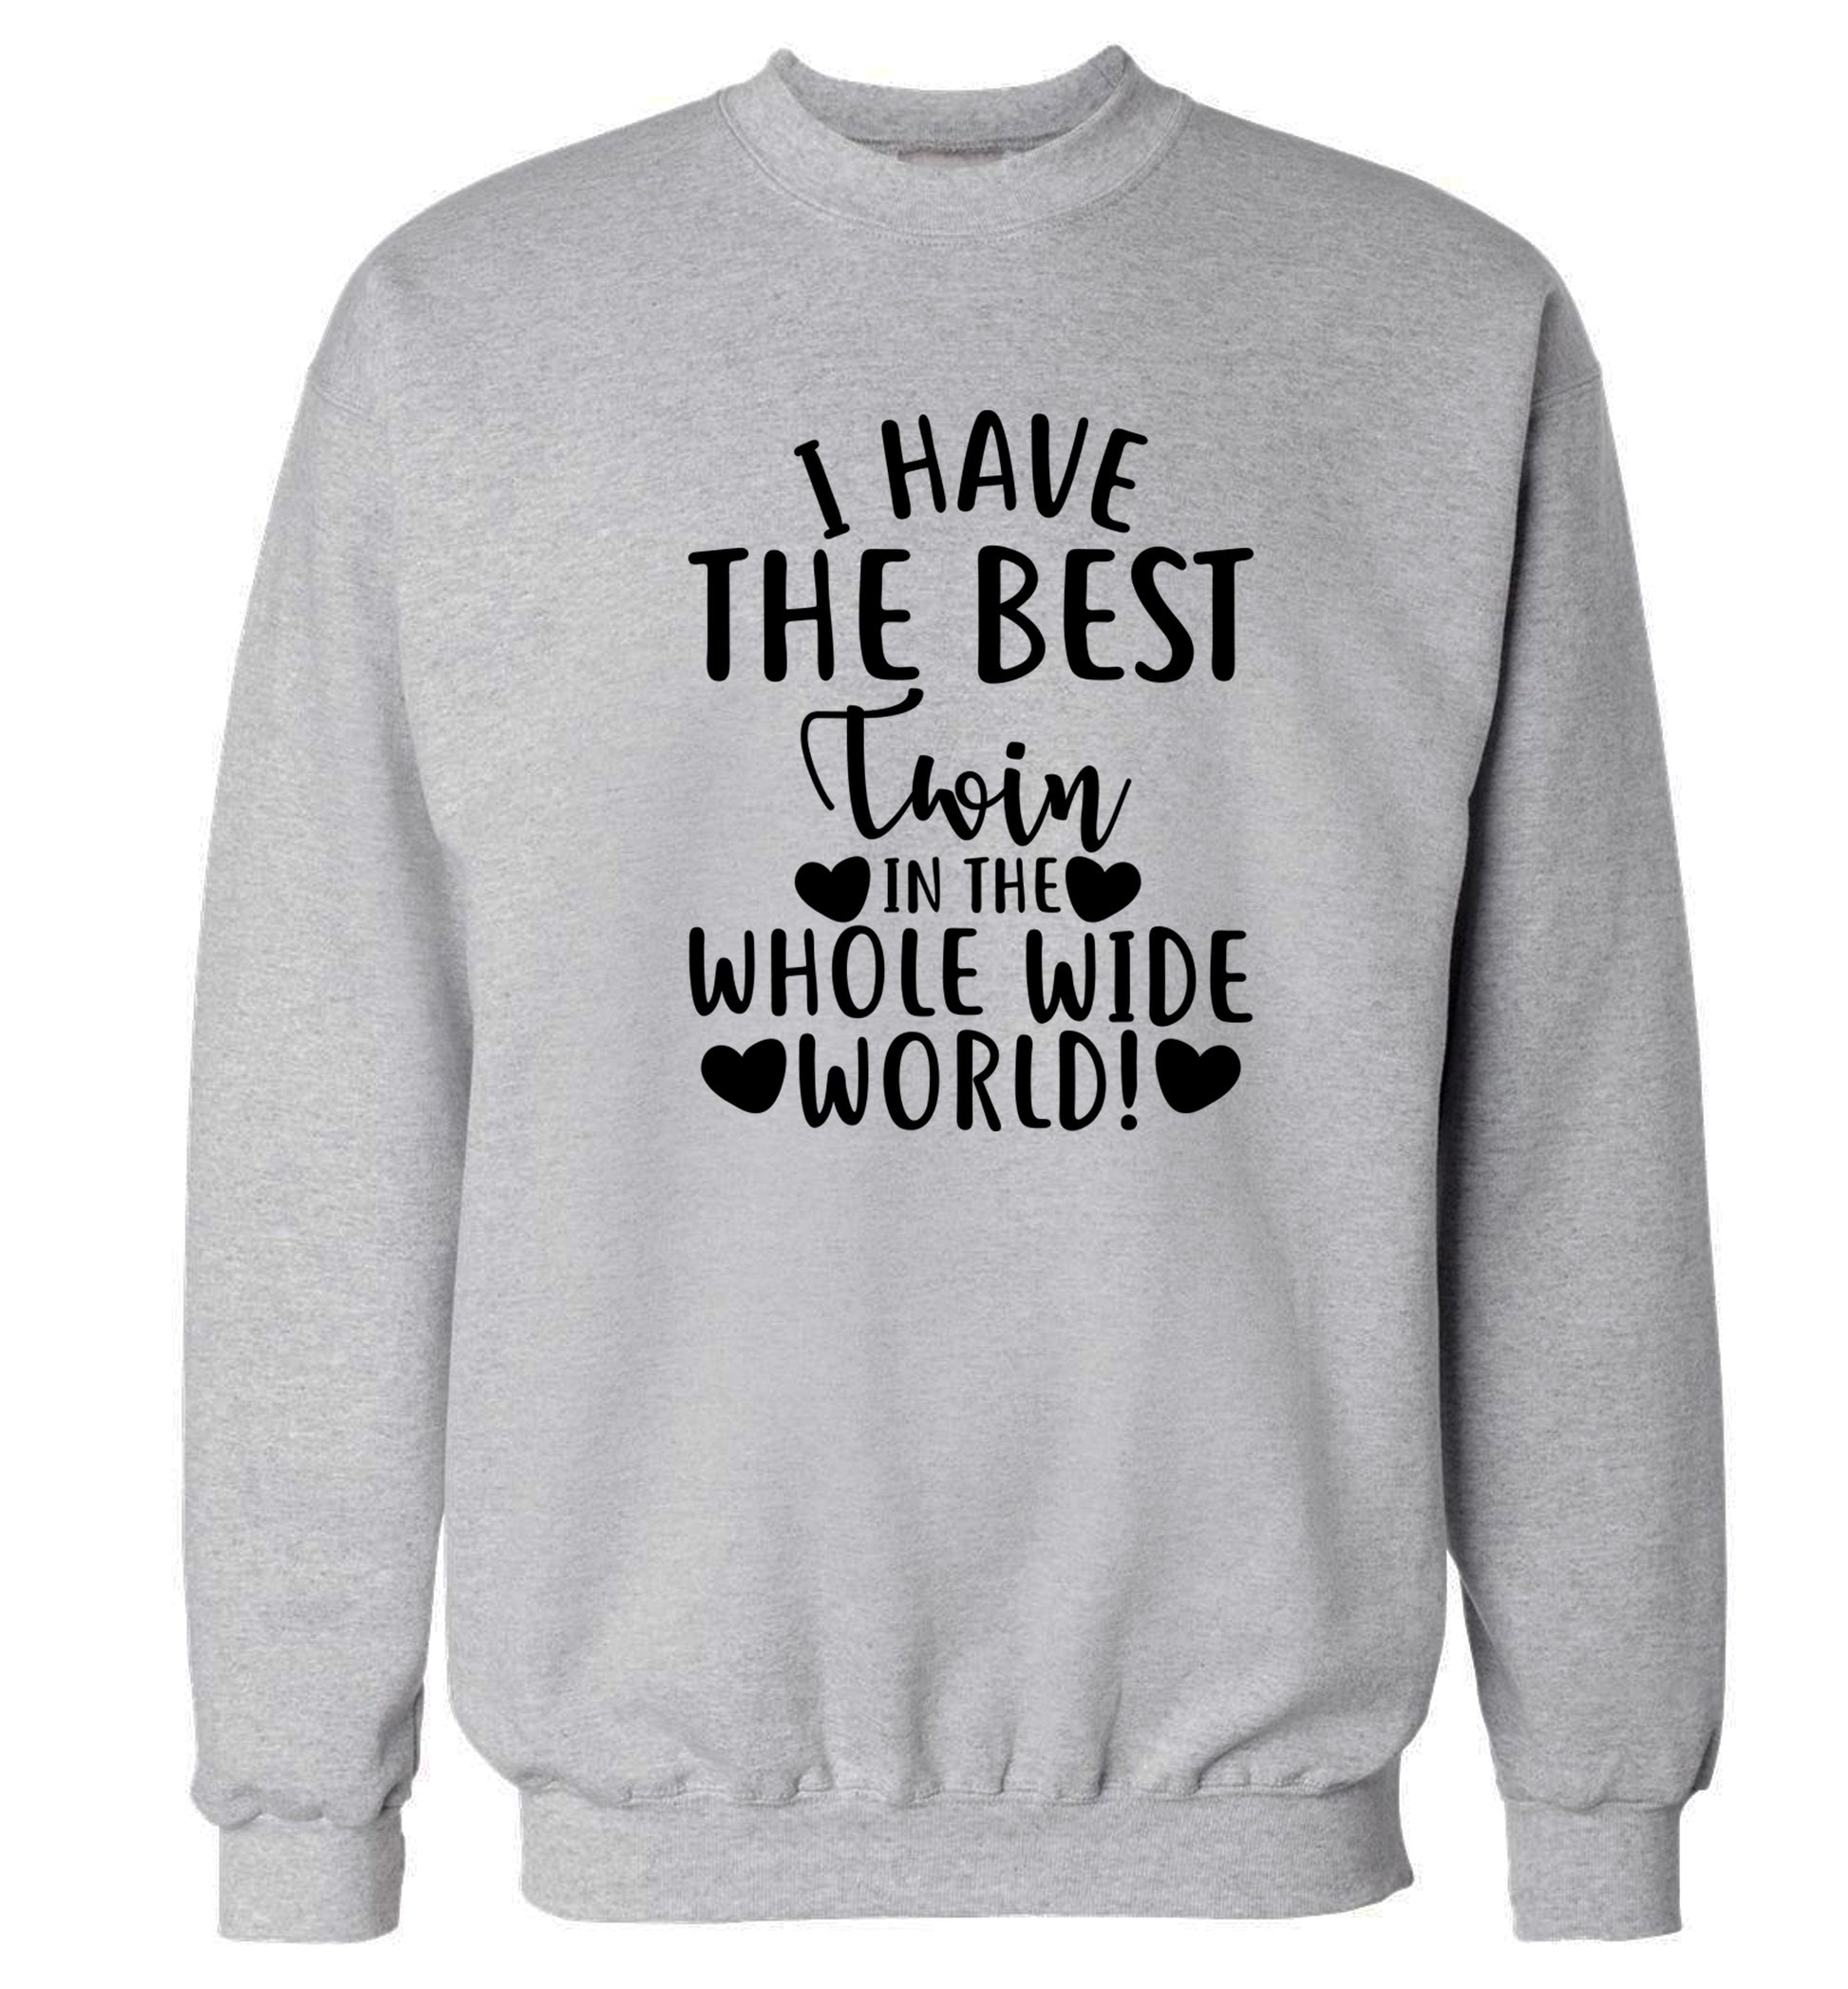 I have the best twin in the whole wide world! Adult's unisex grey Sweater 2XL